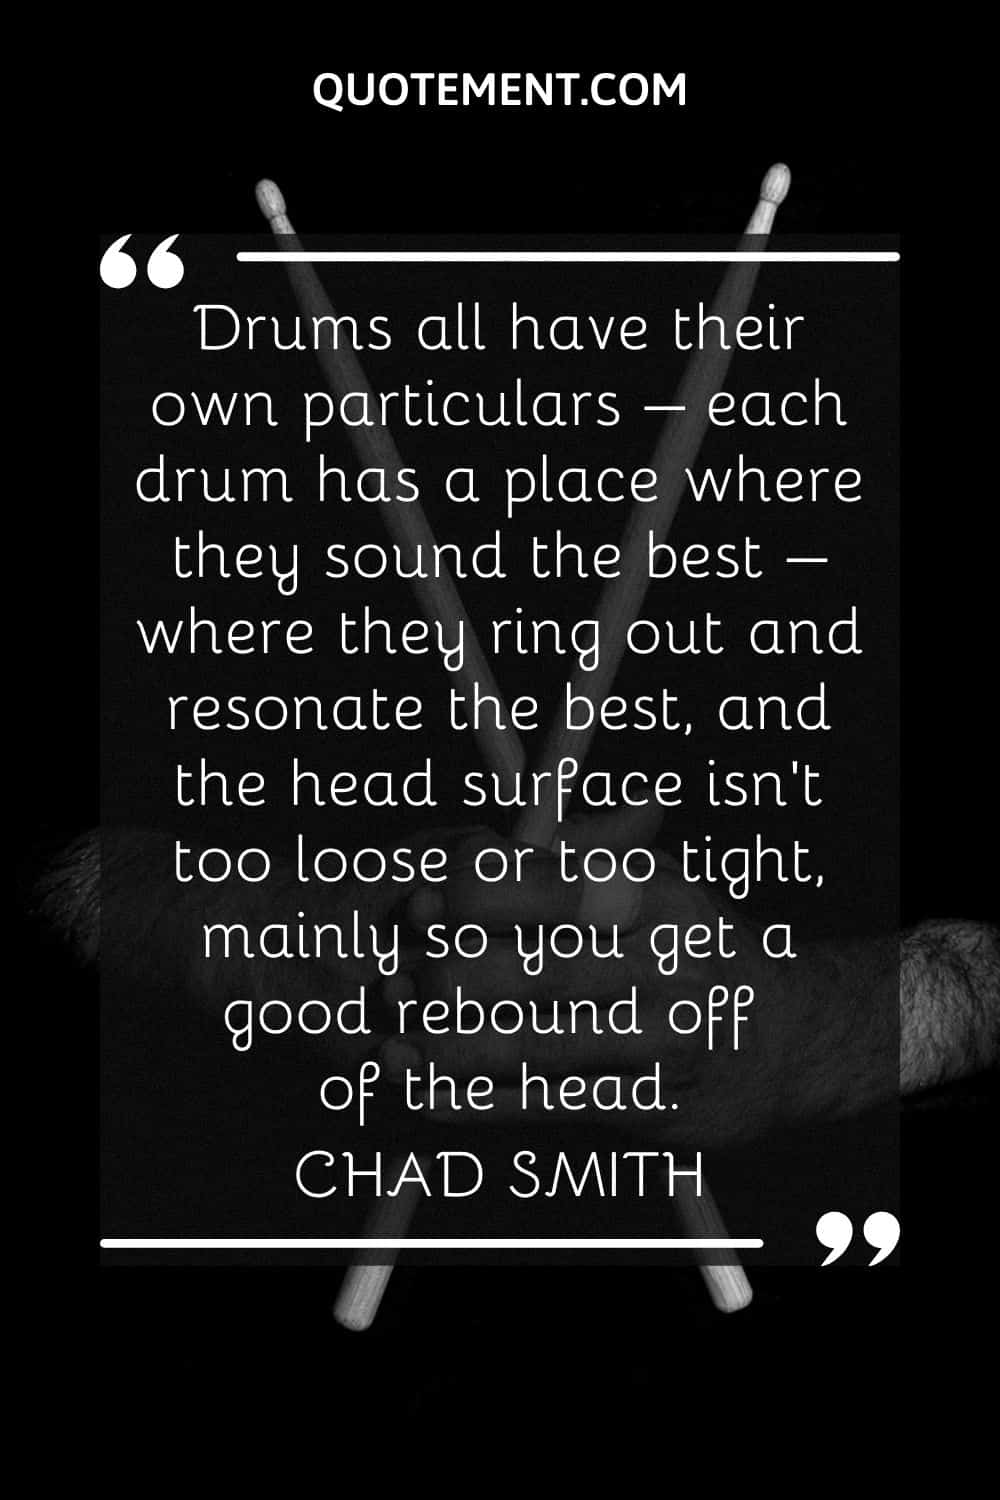 Drums all have their own particulars